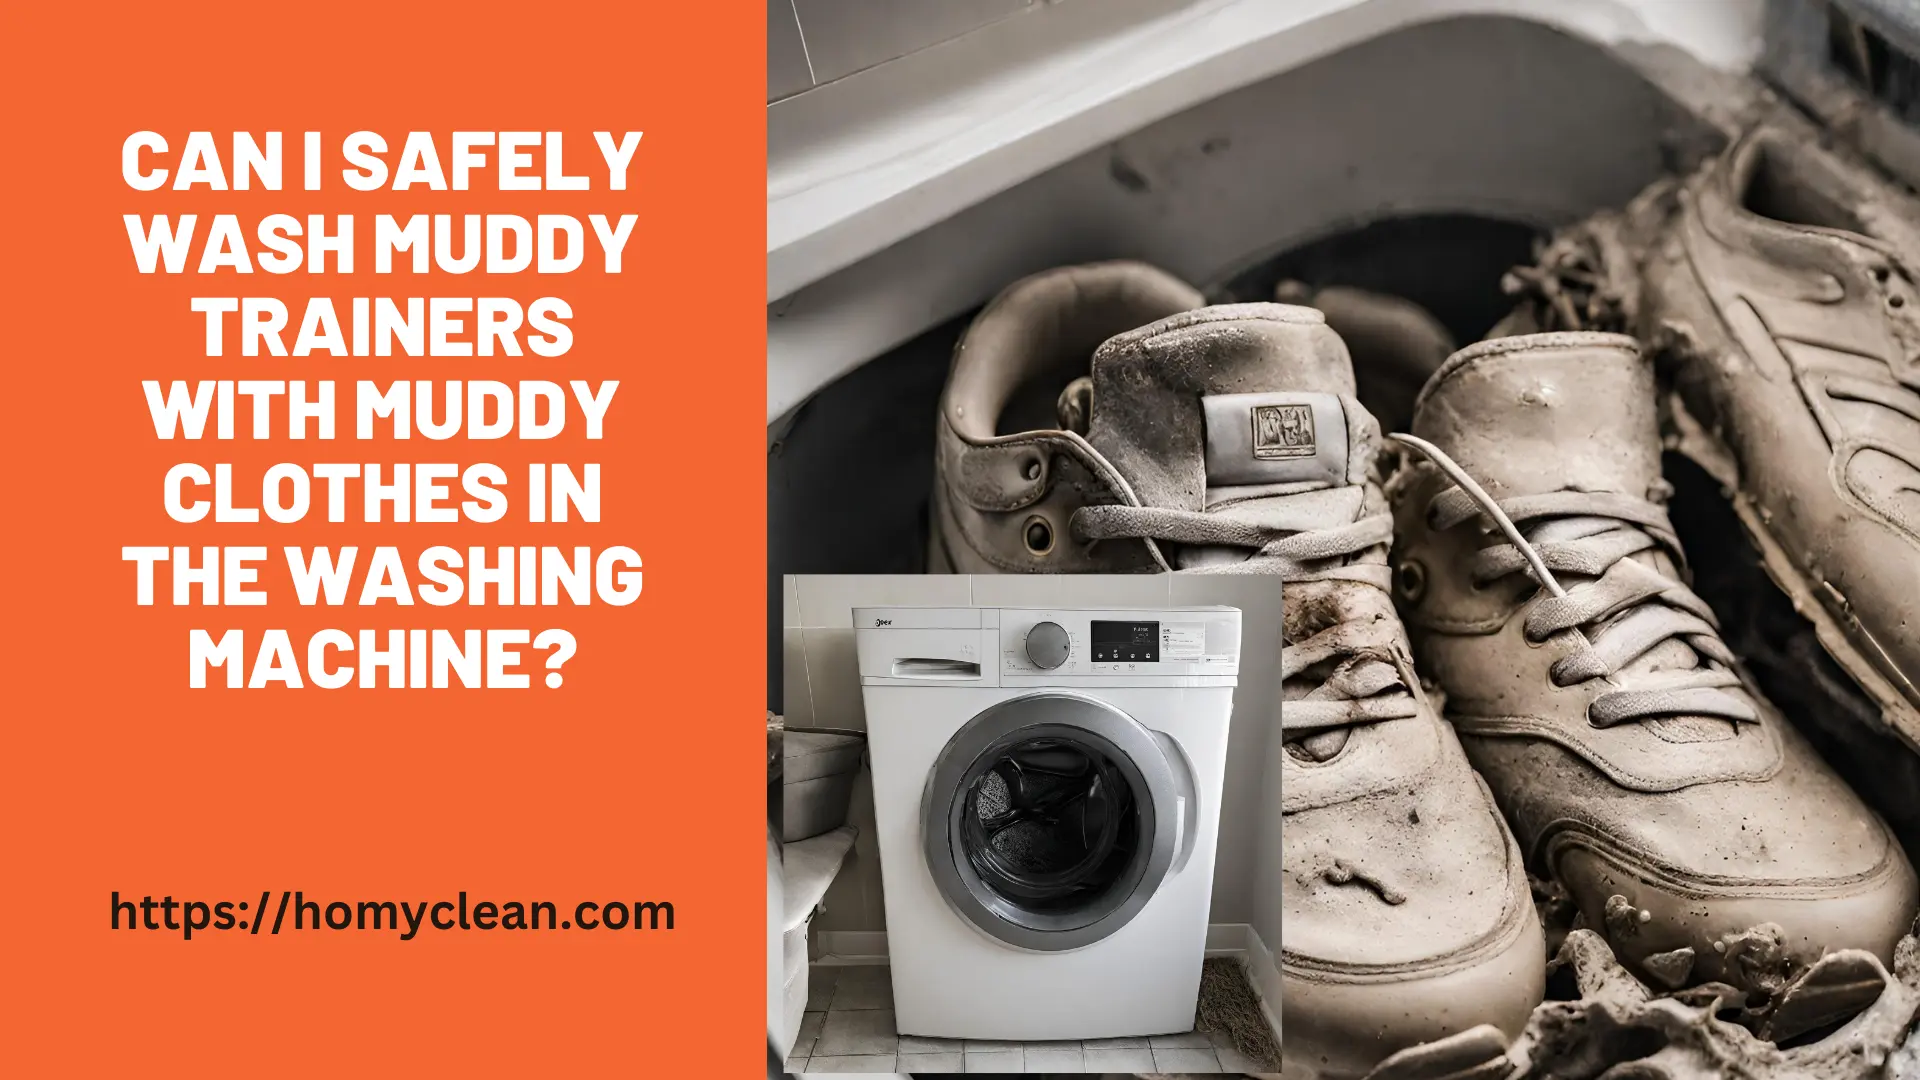 how Can I wash muddy trainers with muddy clothes in the washing machine